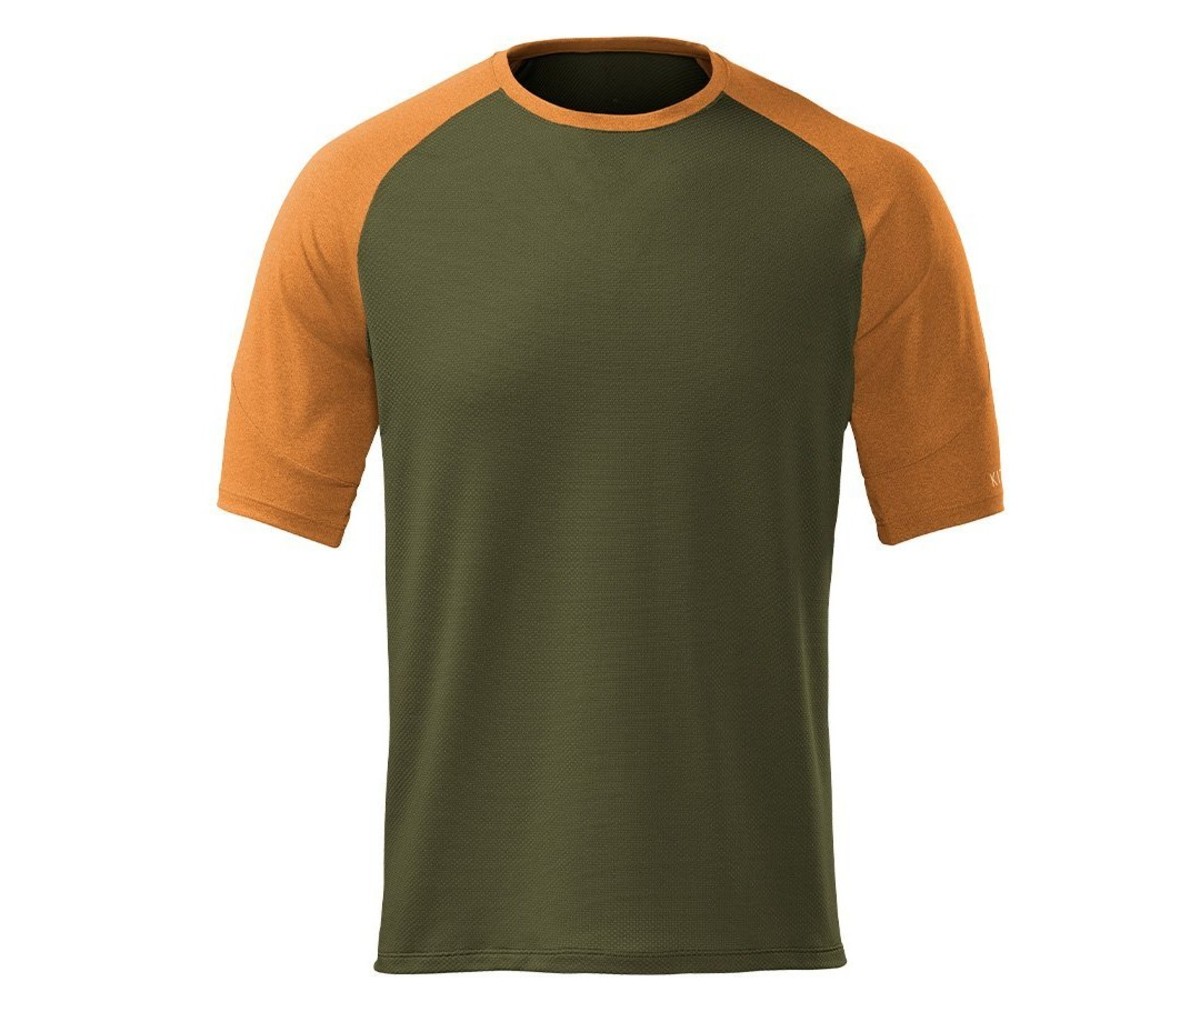 A picture of an orange and green Kitsbow Superflow Cooling Tee.